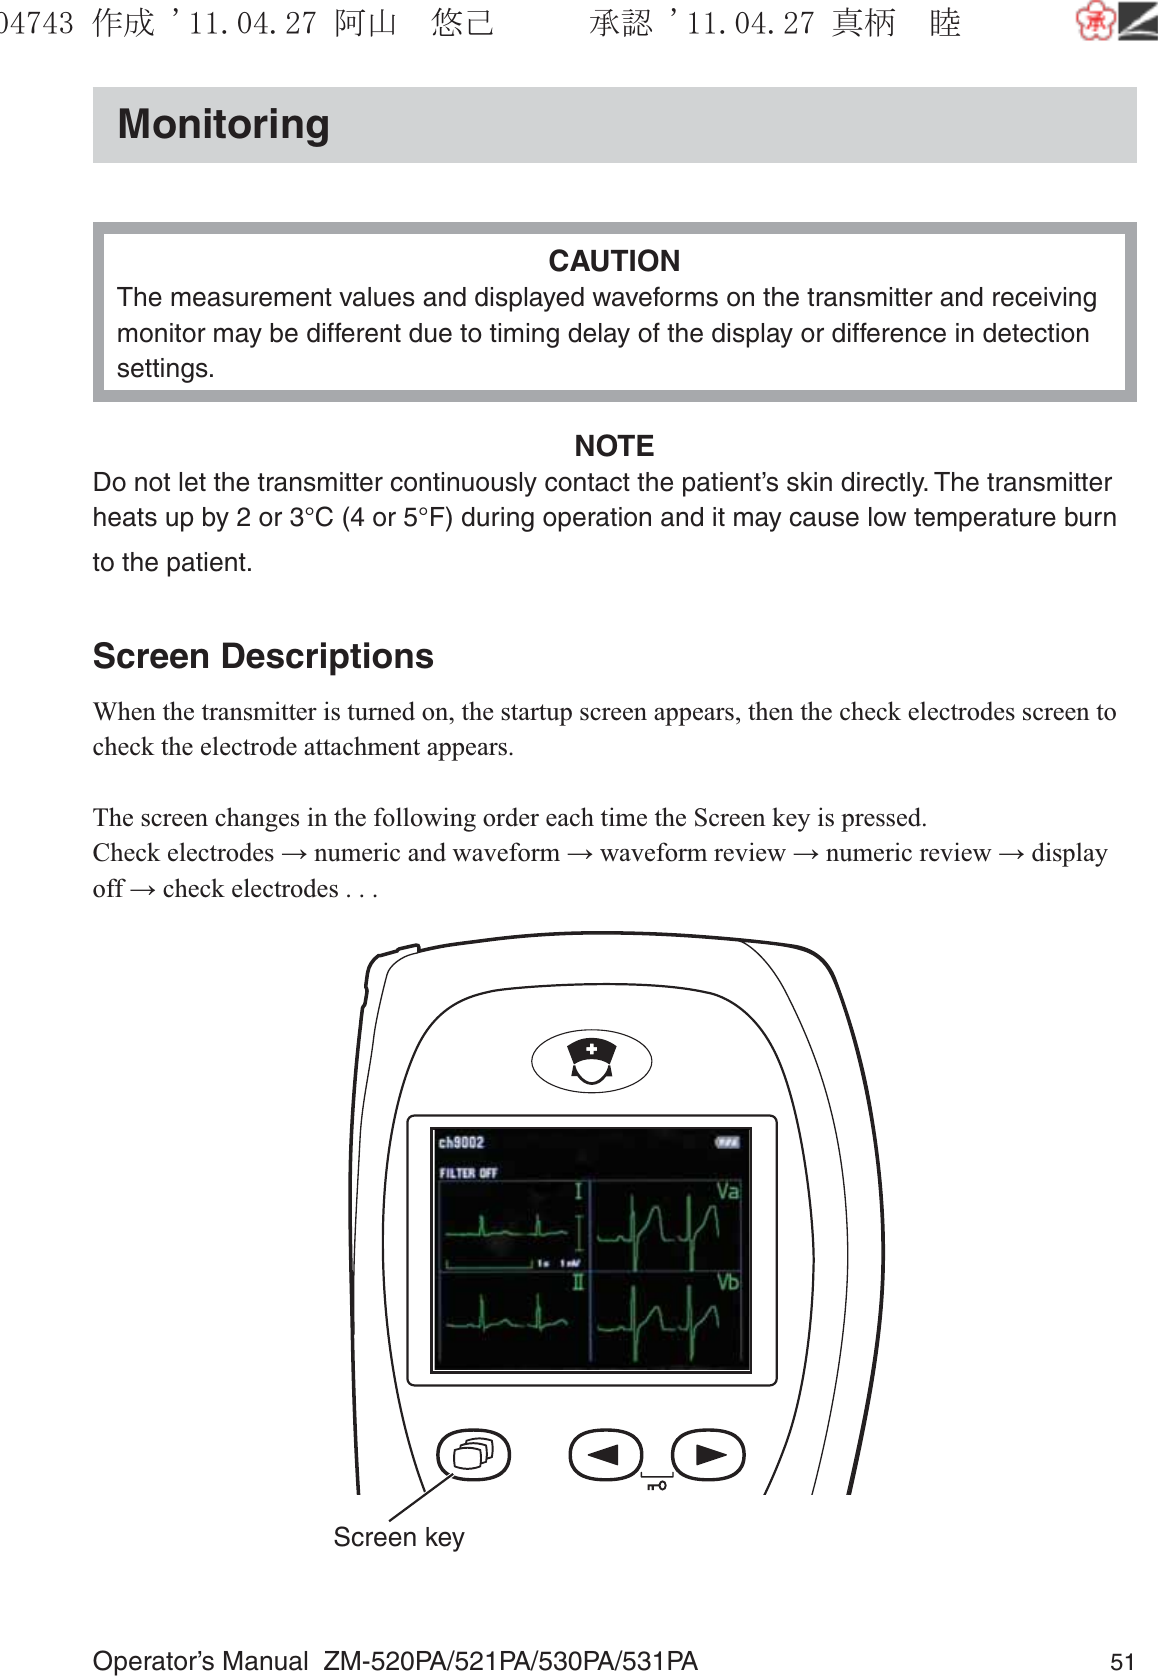 Operator’s Manual  ZM-520PA/521PA/530PA/531PA 51MonitoringCAUTIONThe measurement values and displayed waveforms on the transmitter and receiving monitor may be different due to timing delay of the display or difference in detection settings.NOTEDo not let the transmitter continuously contact the patient’s skin directly. The transmitter heats up by 2 or 3°C (4 or 5°F) during operation and it may cause low temperature burn to the patient.Screen DescriptionsWhen the transmitter is turned on, the startup screen appears, then the check electrodes screen to check the electrode attachment appears.The screen changes in the following order each time the Screen key is pressed.Check electrodes → numeric and waveform → waveform review → numeric review → display off → check electrodes . . . Screen key૞ᚑ㒙ጊޓᖘᏆ ᛚ⹺⌀ᨩޓ⌬